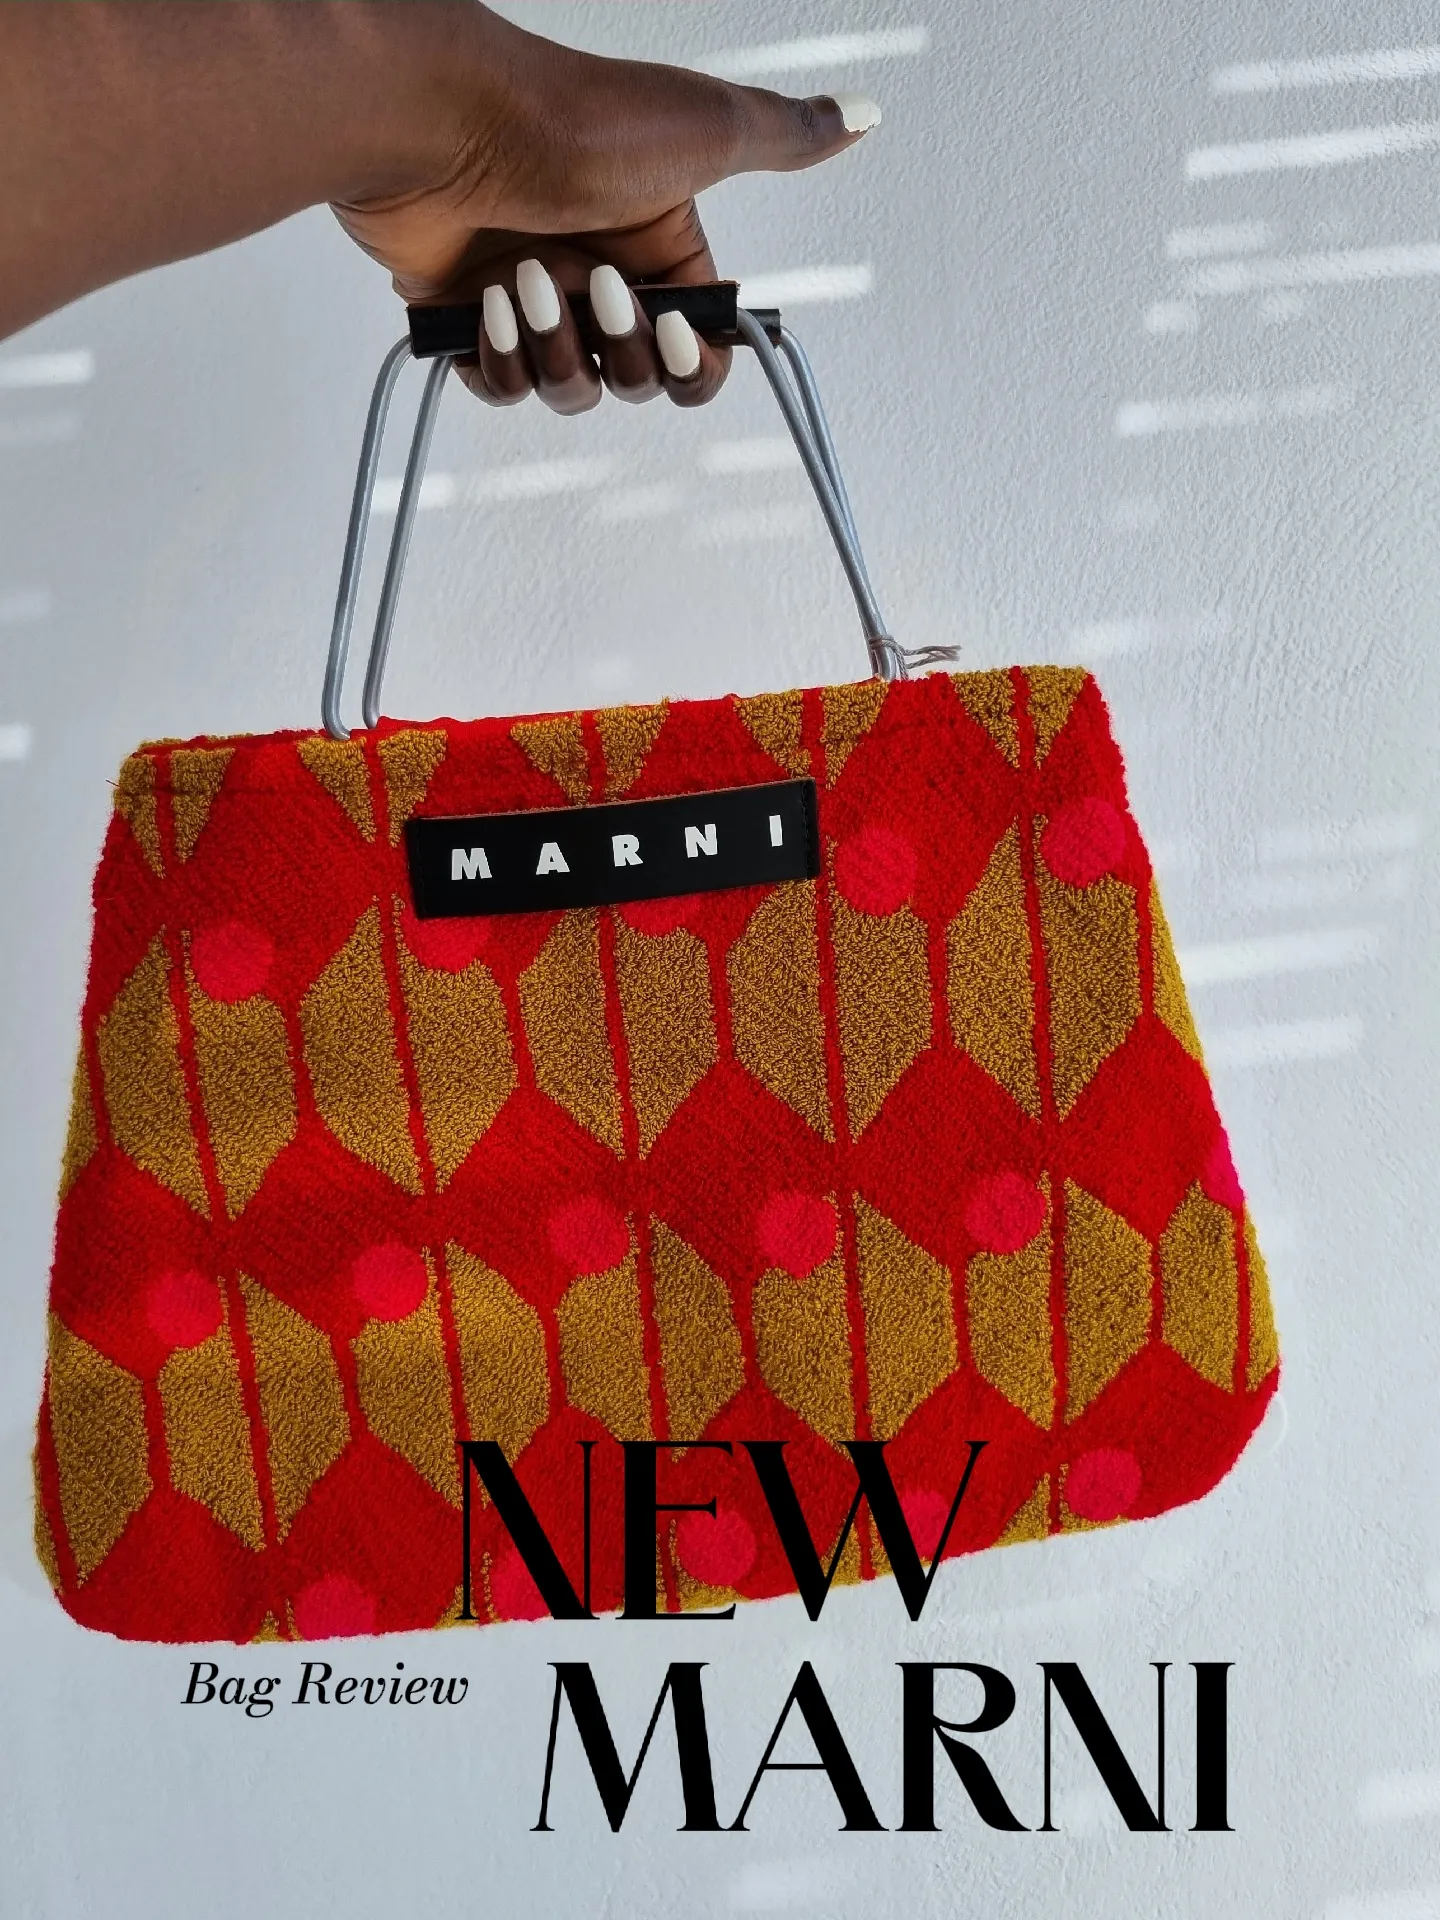 NEW MARNI BAG - REVIEW, Gallery posted by sarahs_rails